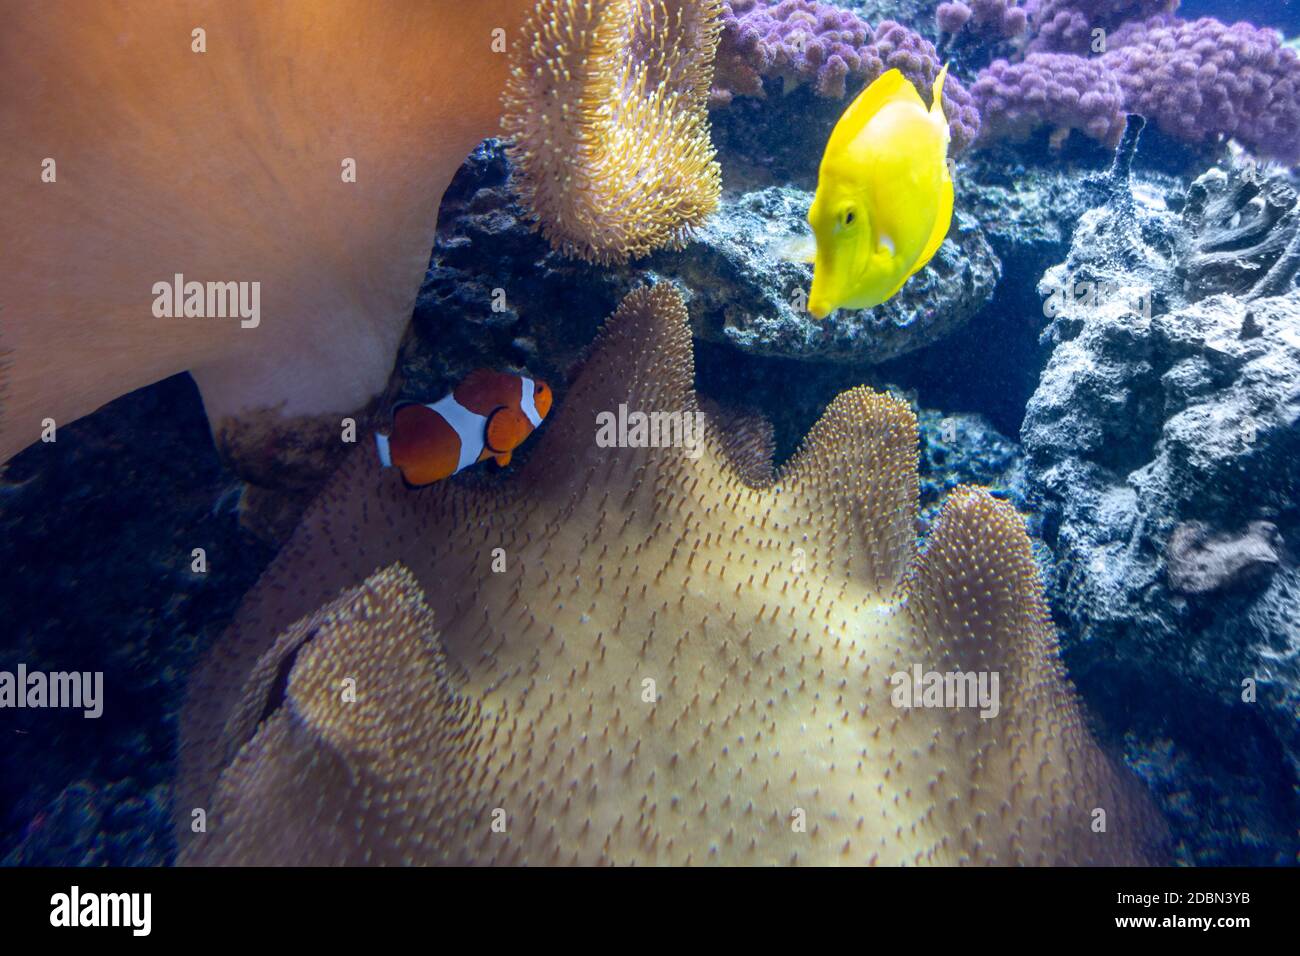 colorful coral reef scenery with lots of different corals, sea anemones and fishes Stock Photo